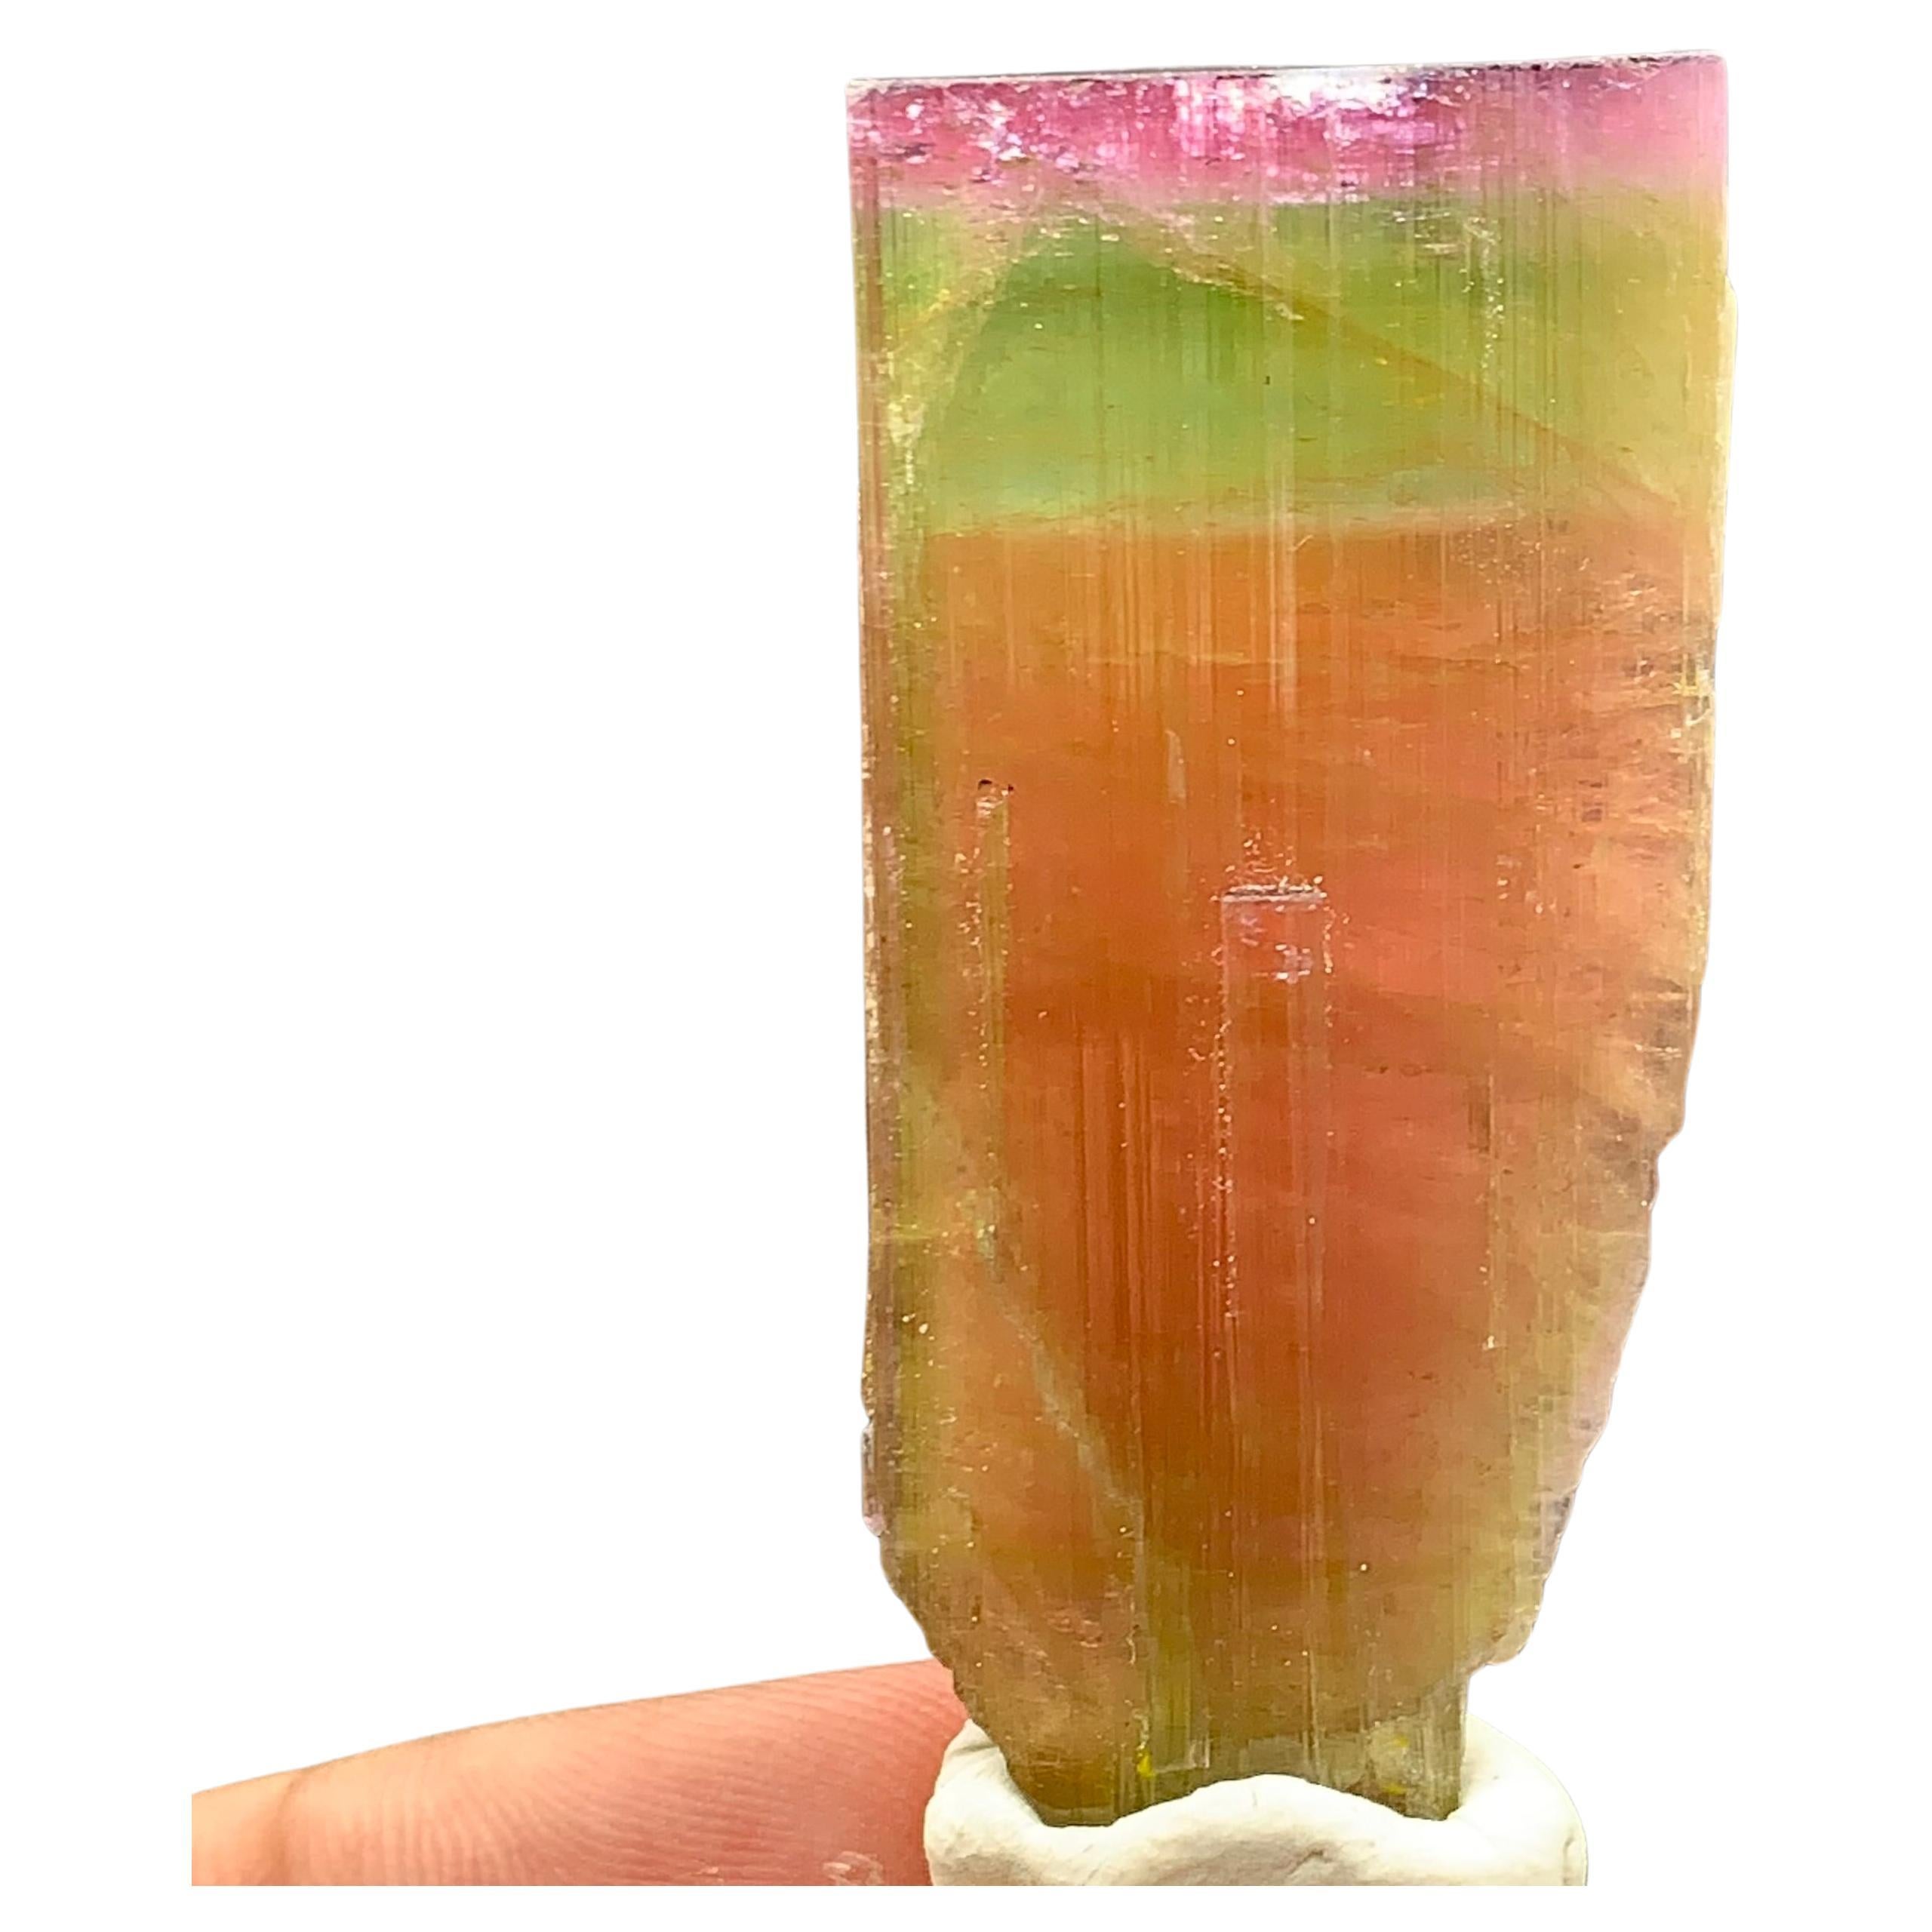 Stunning Tri-Color Tourmaline Crystal From Paprok Mine Afghanistan
WEIGHT: 130.60 Carat
DIMENSIONS : 5.1 x 2.4 x 1.7 Cm
ORIGIN: Nooristan, Afghanistan
TREATMENT: None
Tourmaline is an extremely popular gemstone; the name Tourmaline is derived